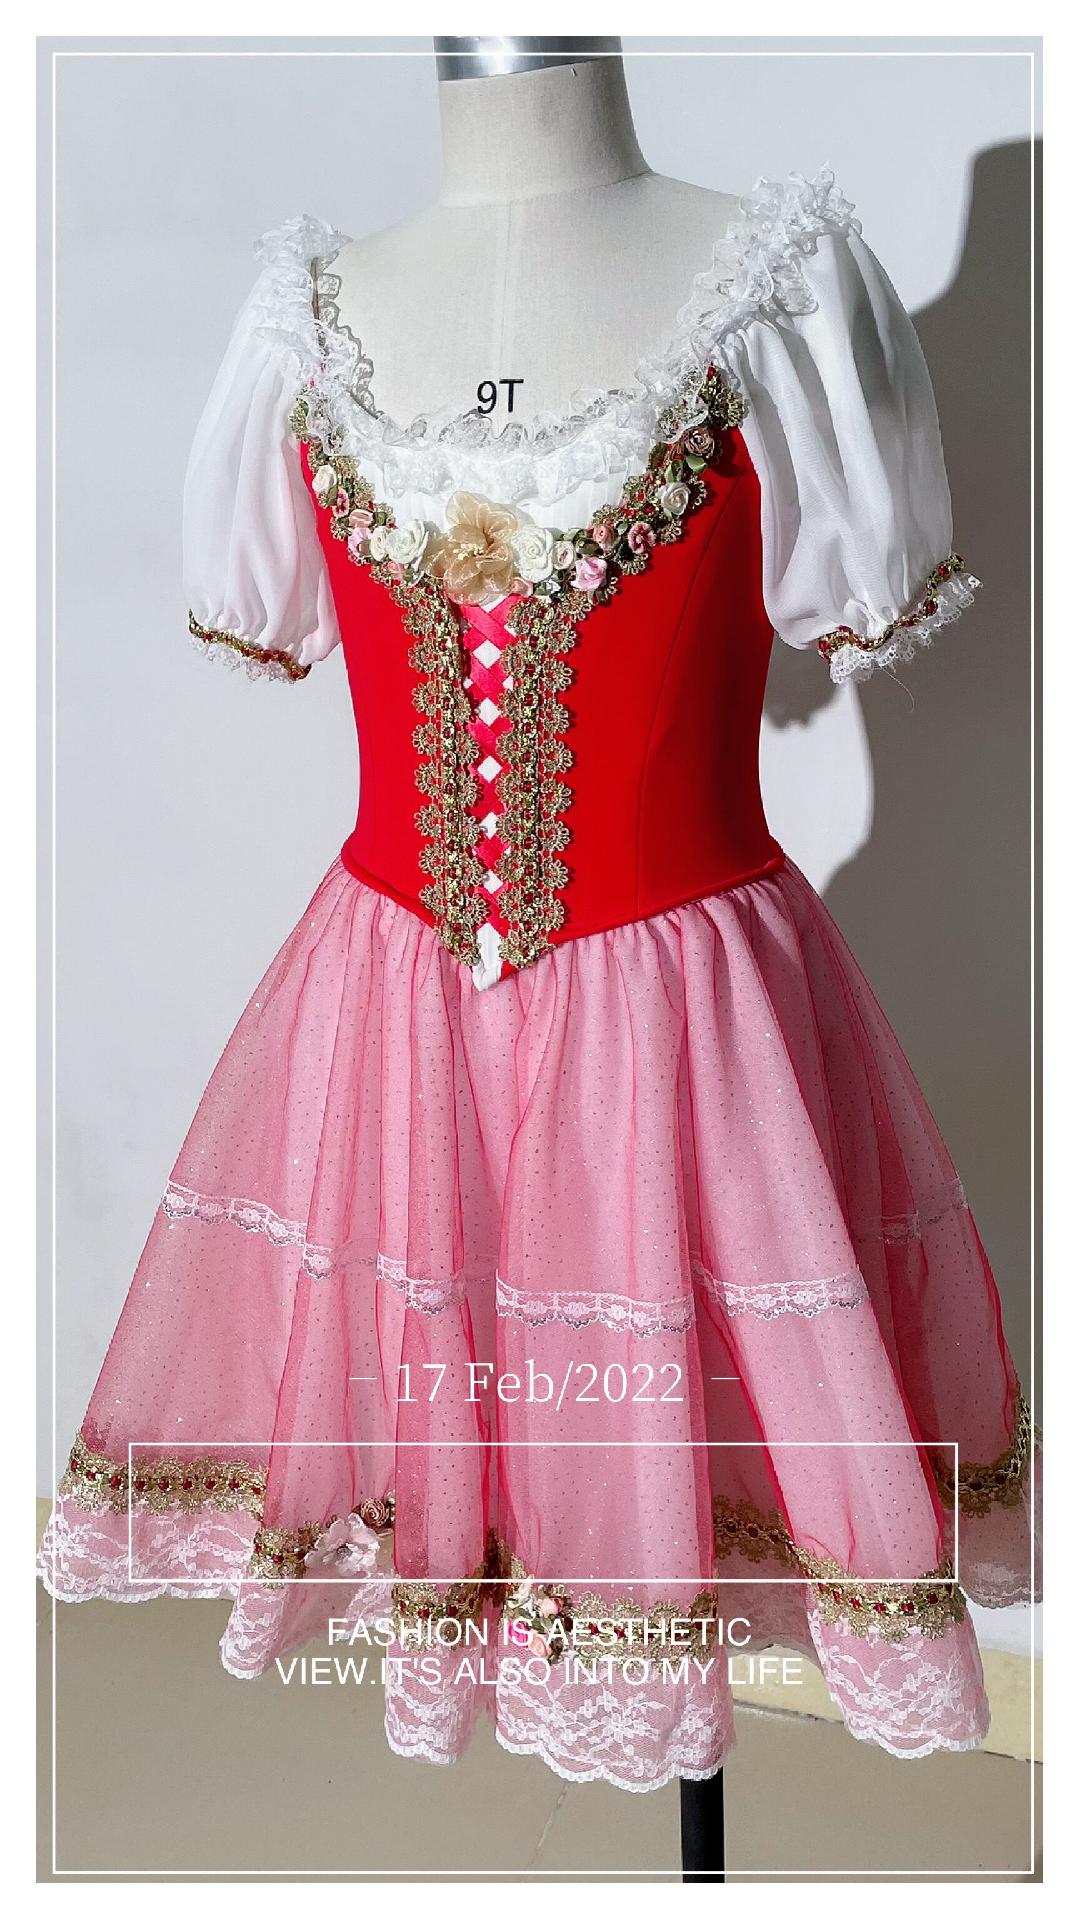 Red Riding Hood - Giselle Tutus